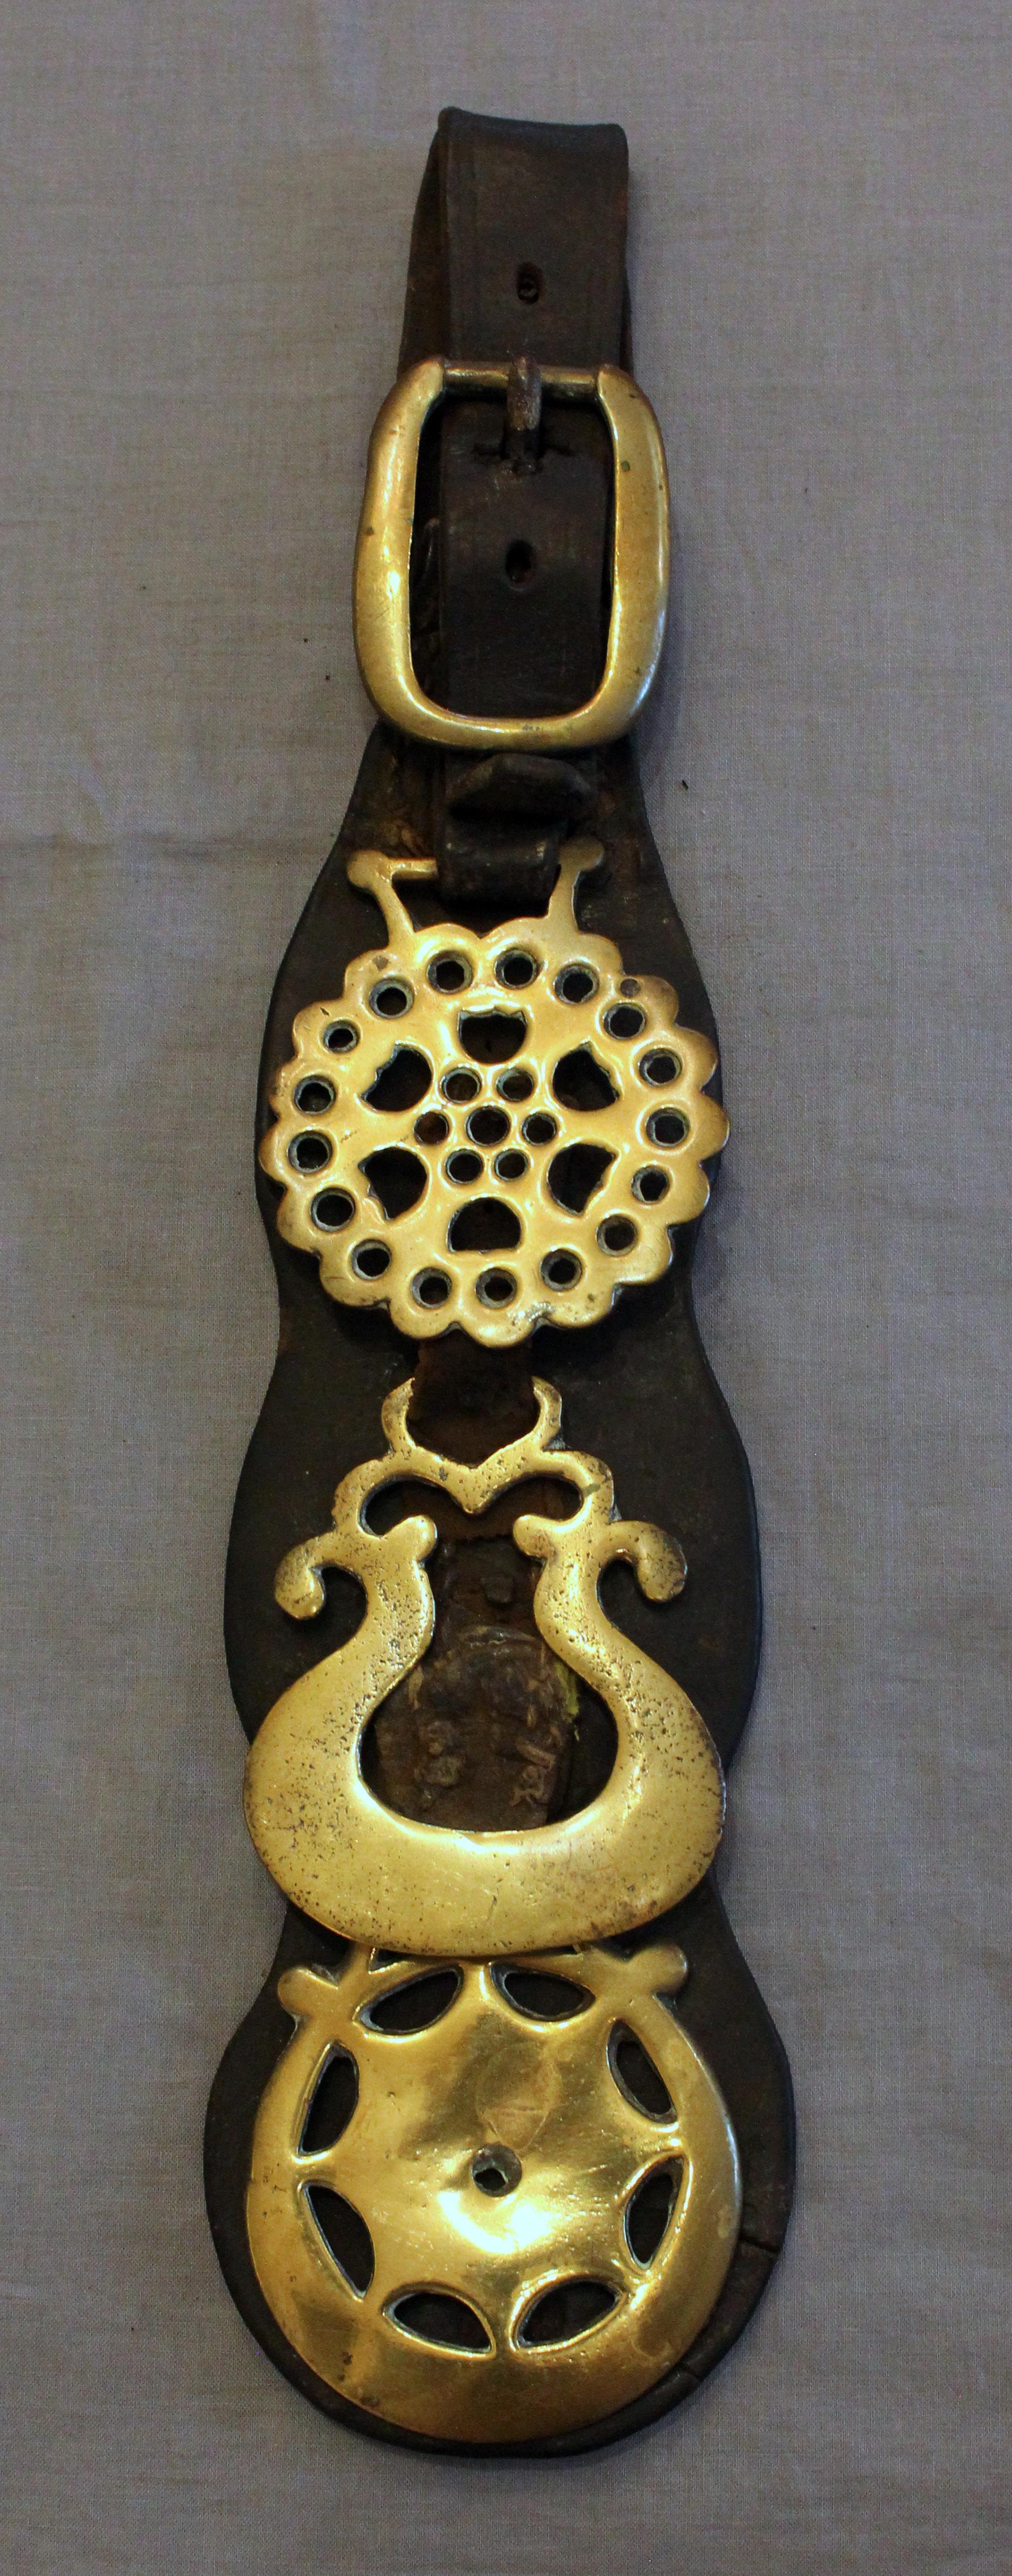 English 3-brass shaped leather horse strap, early 20th century. Three decorative brasses under brass buckle.
15.5